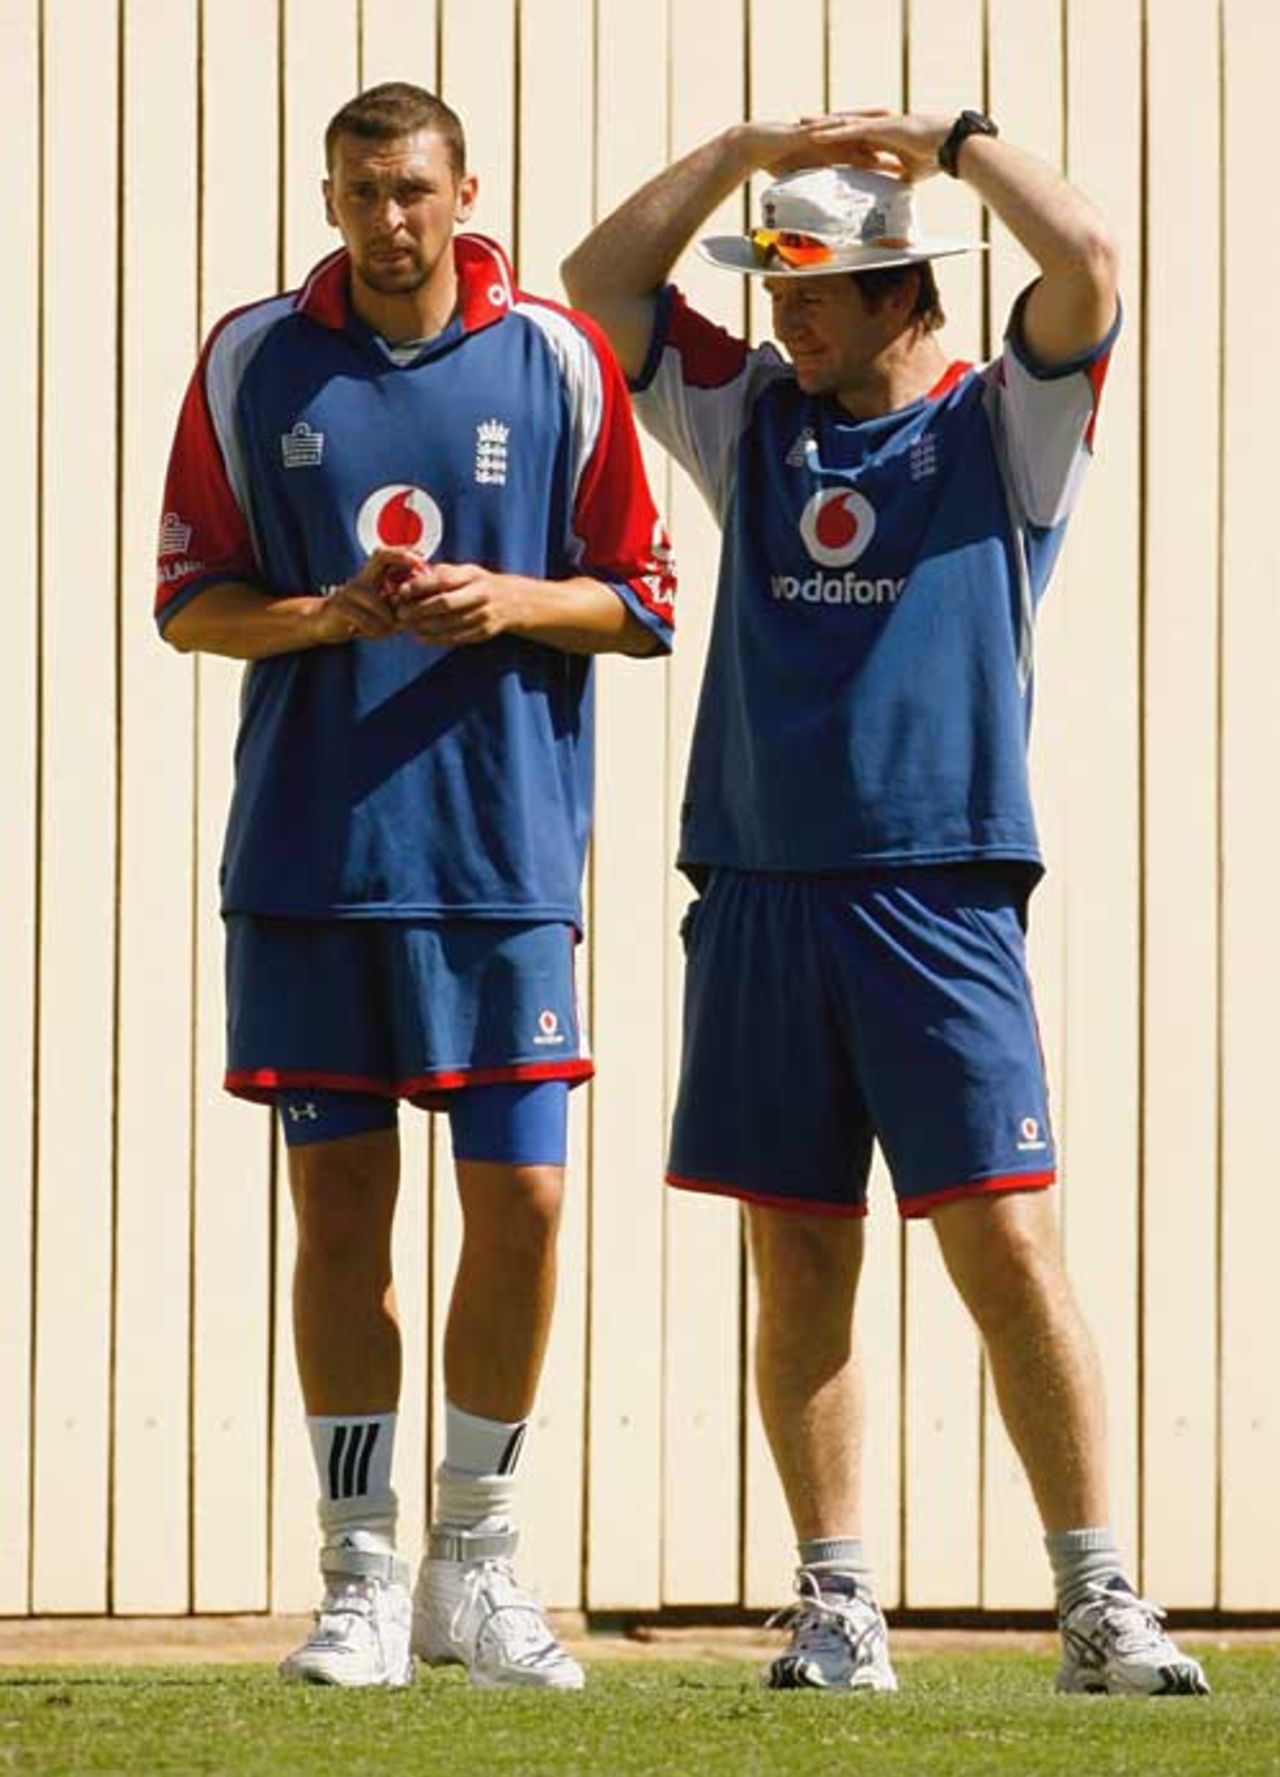 Kevin Shine chats with Steve Harmison in the nets, Adelaide, November 29, 2006